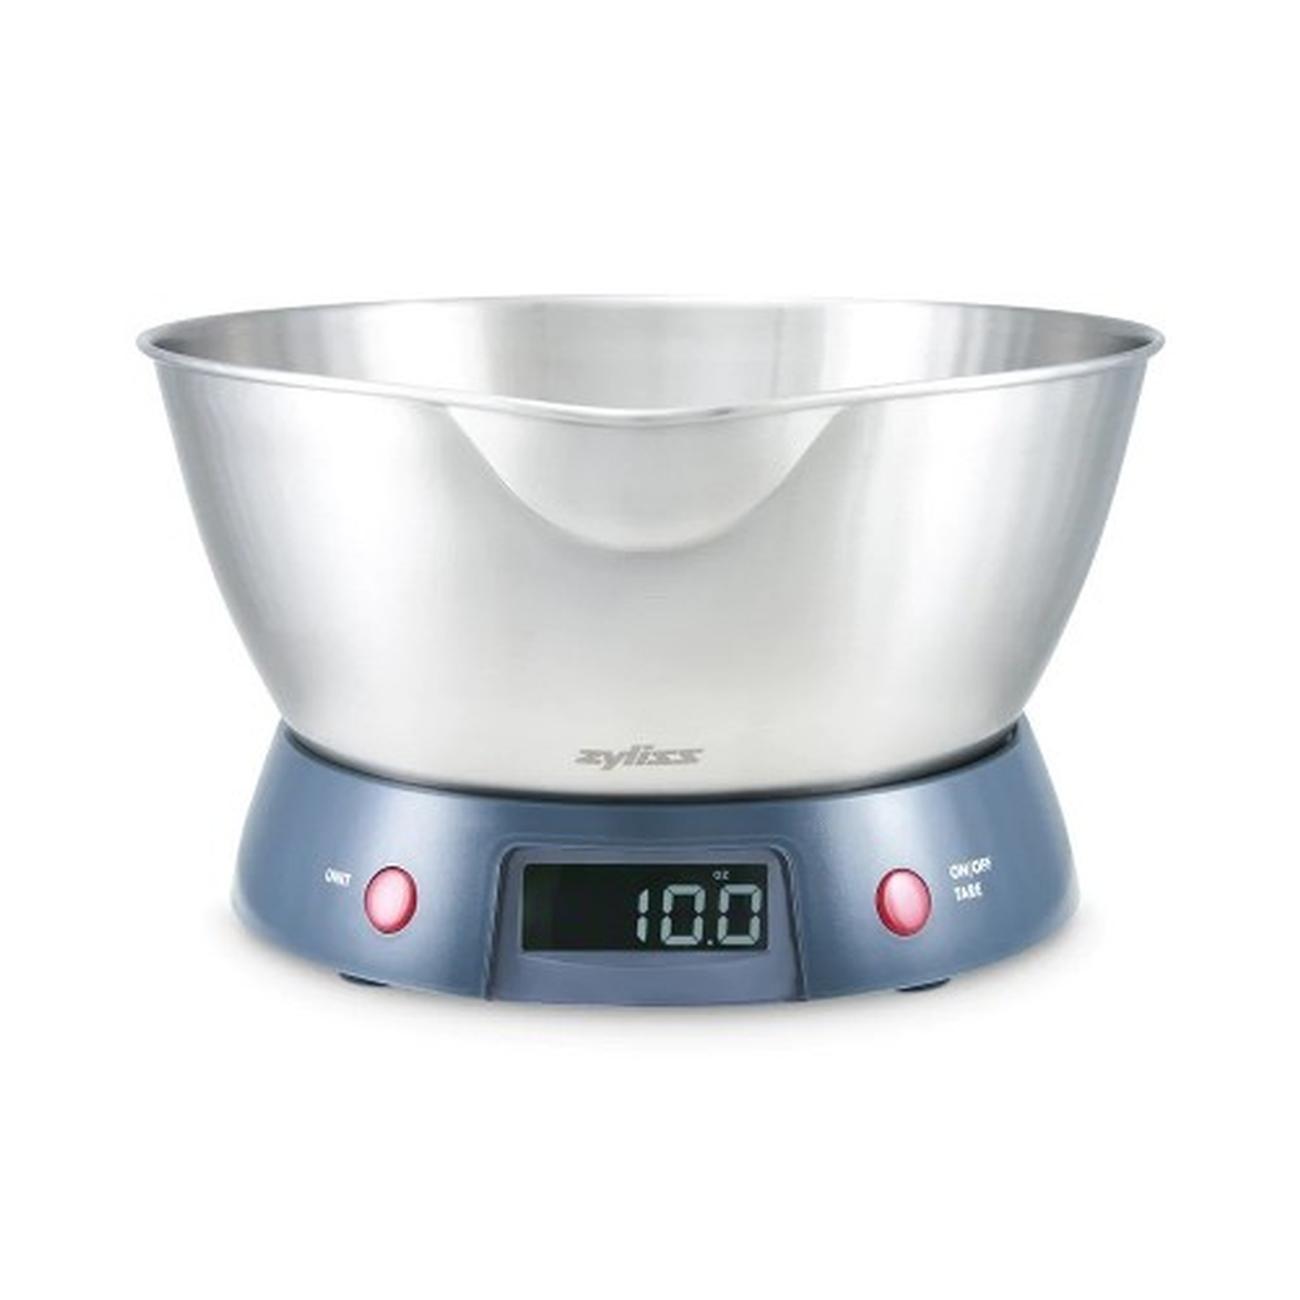 https://www.thekitchenwhisk.ie/contentFiles/productImages/Large/Zyliss-Digital-Kitchen-Scales.jpg